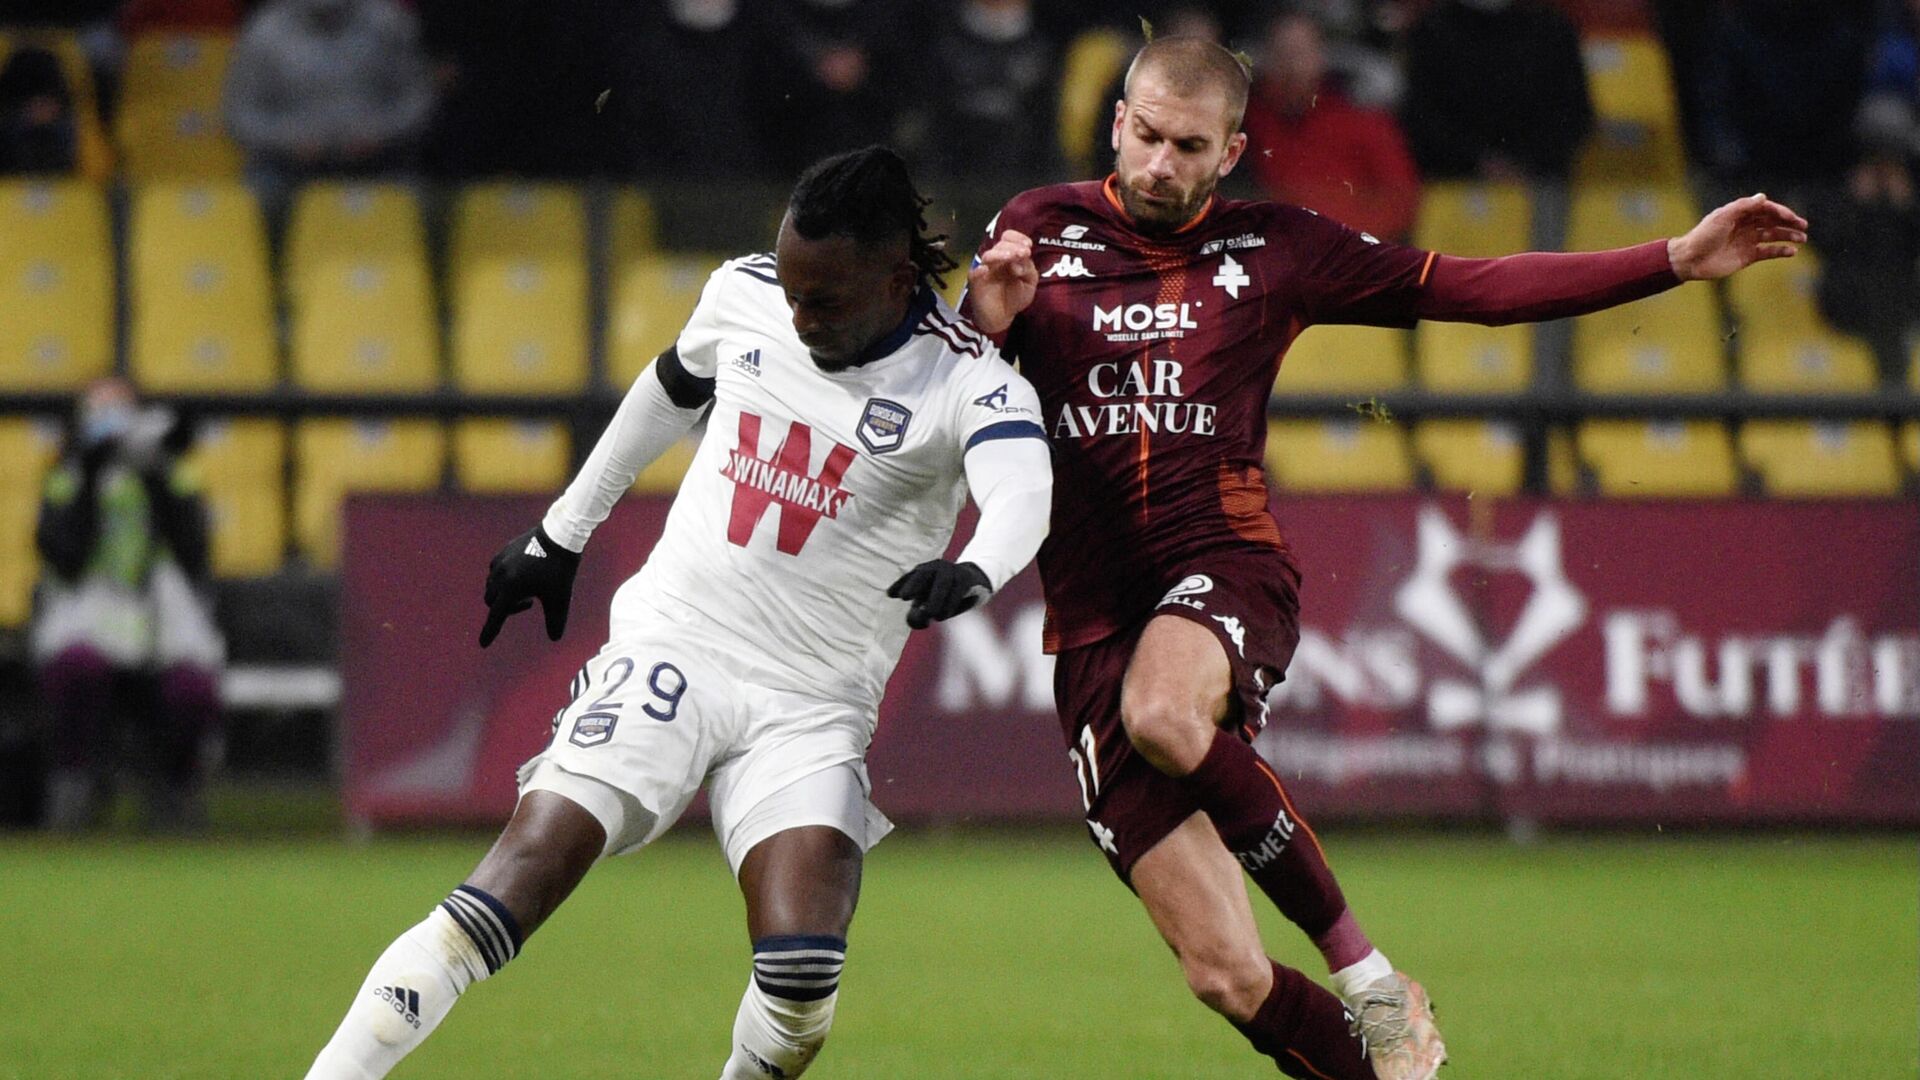 Bordeaux’s Honduran forward Alberth Elis (L) fights for the ball with Metz’ French defender Thomas Delaine during the French L1 football match between FC Metz and FC Girondins Bordeaux at Saint-Symphorien stadium in Longeville-les-Metz, eastern France, on November 21, 2021. (Photo by Jean-Christophe Verhaegen / AFP) - РИА Новости, 1920, 21.11.2021